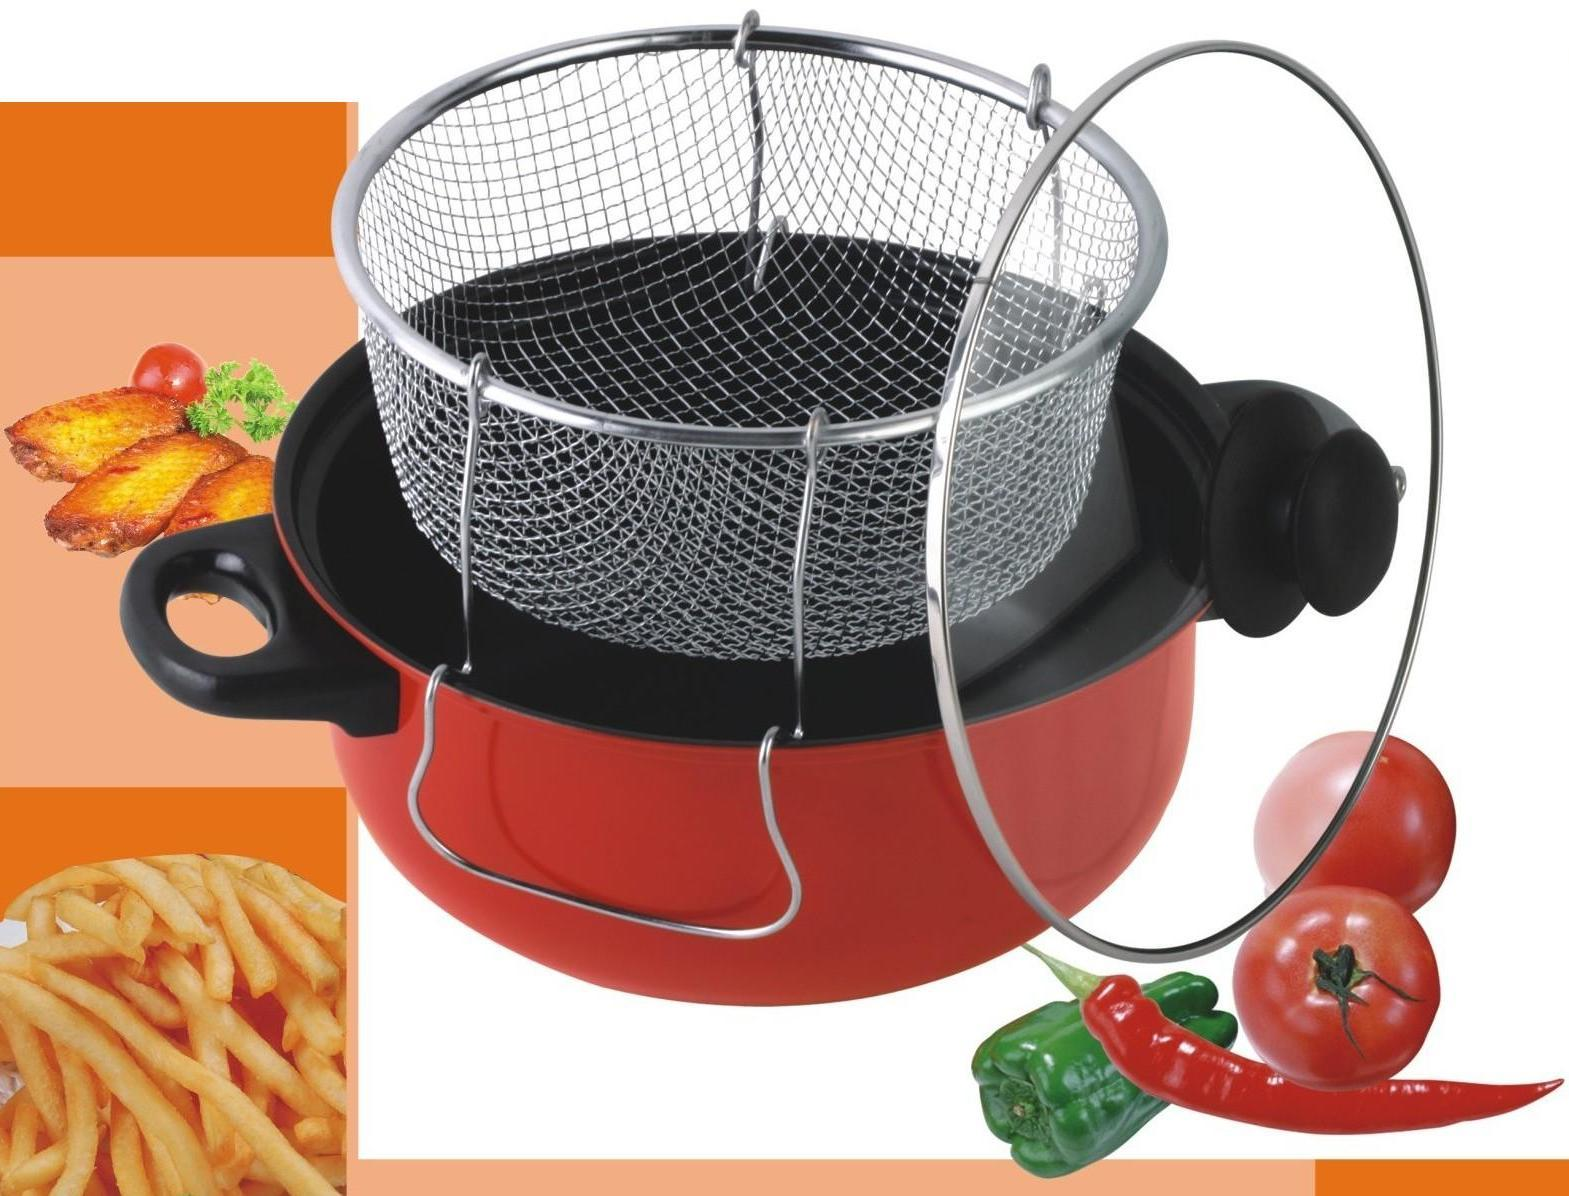 KitchenCuisine Gourmet Chef 4.5 Qt. Non Stick Deep Fryer With Frying Basket & Glass Cover. Red